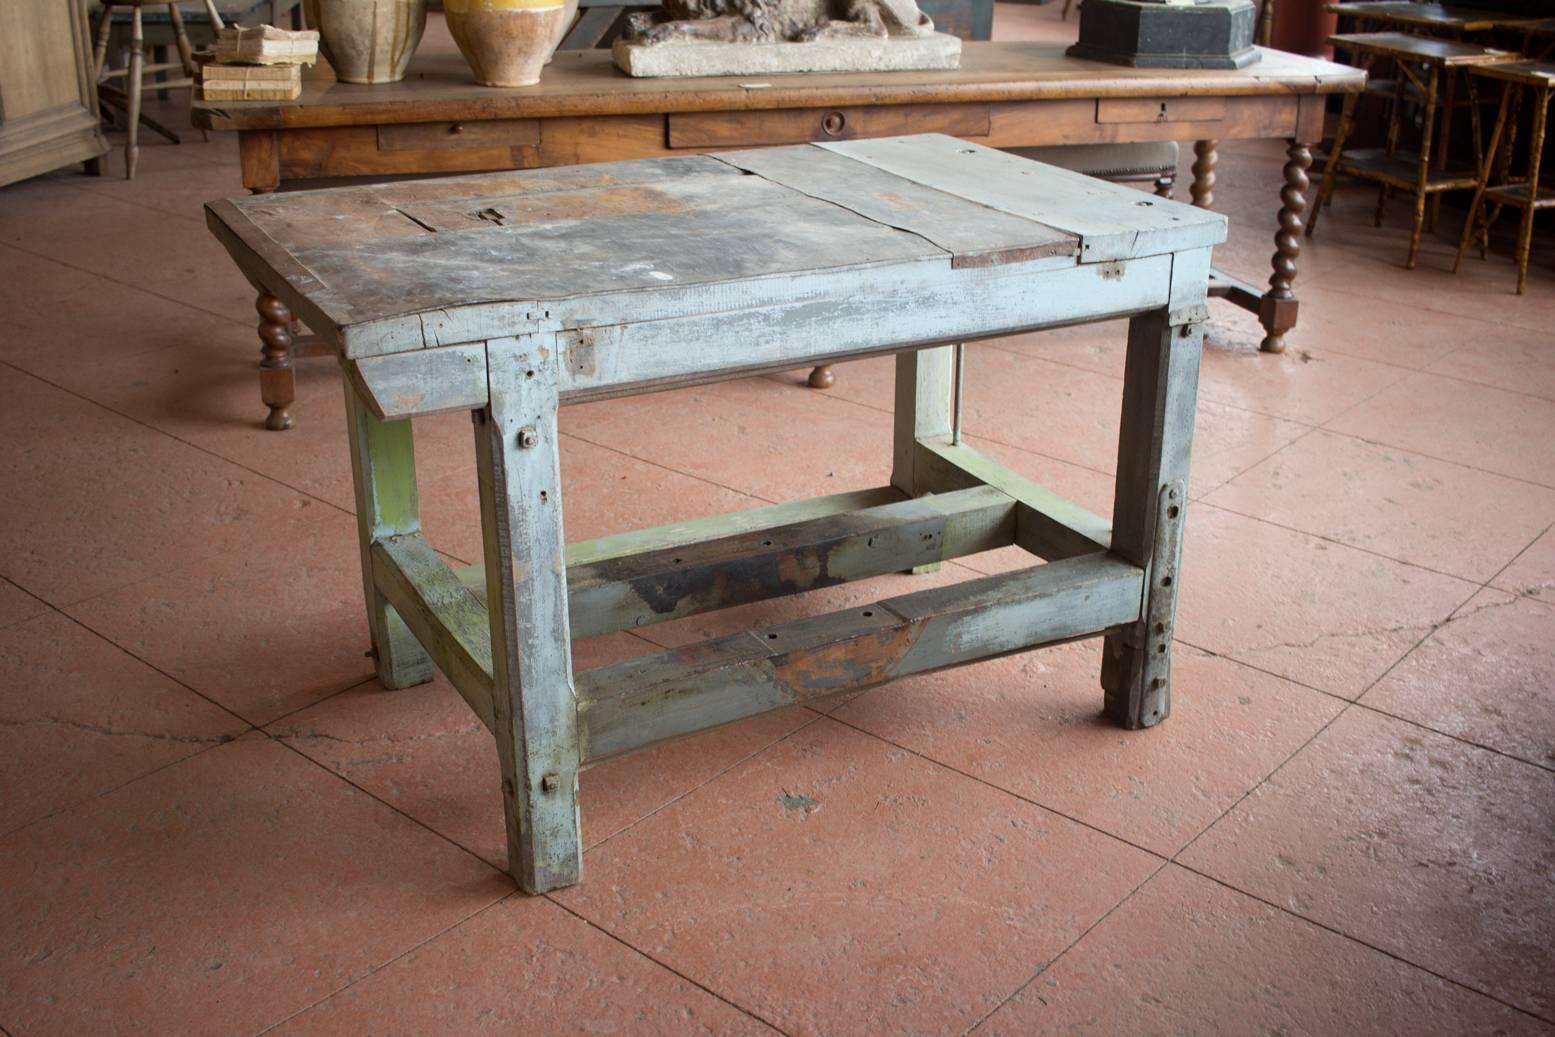 Vintage French zinc top Industrial work table with great patina and texture.